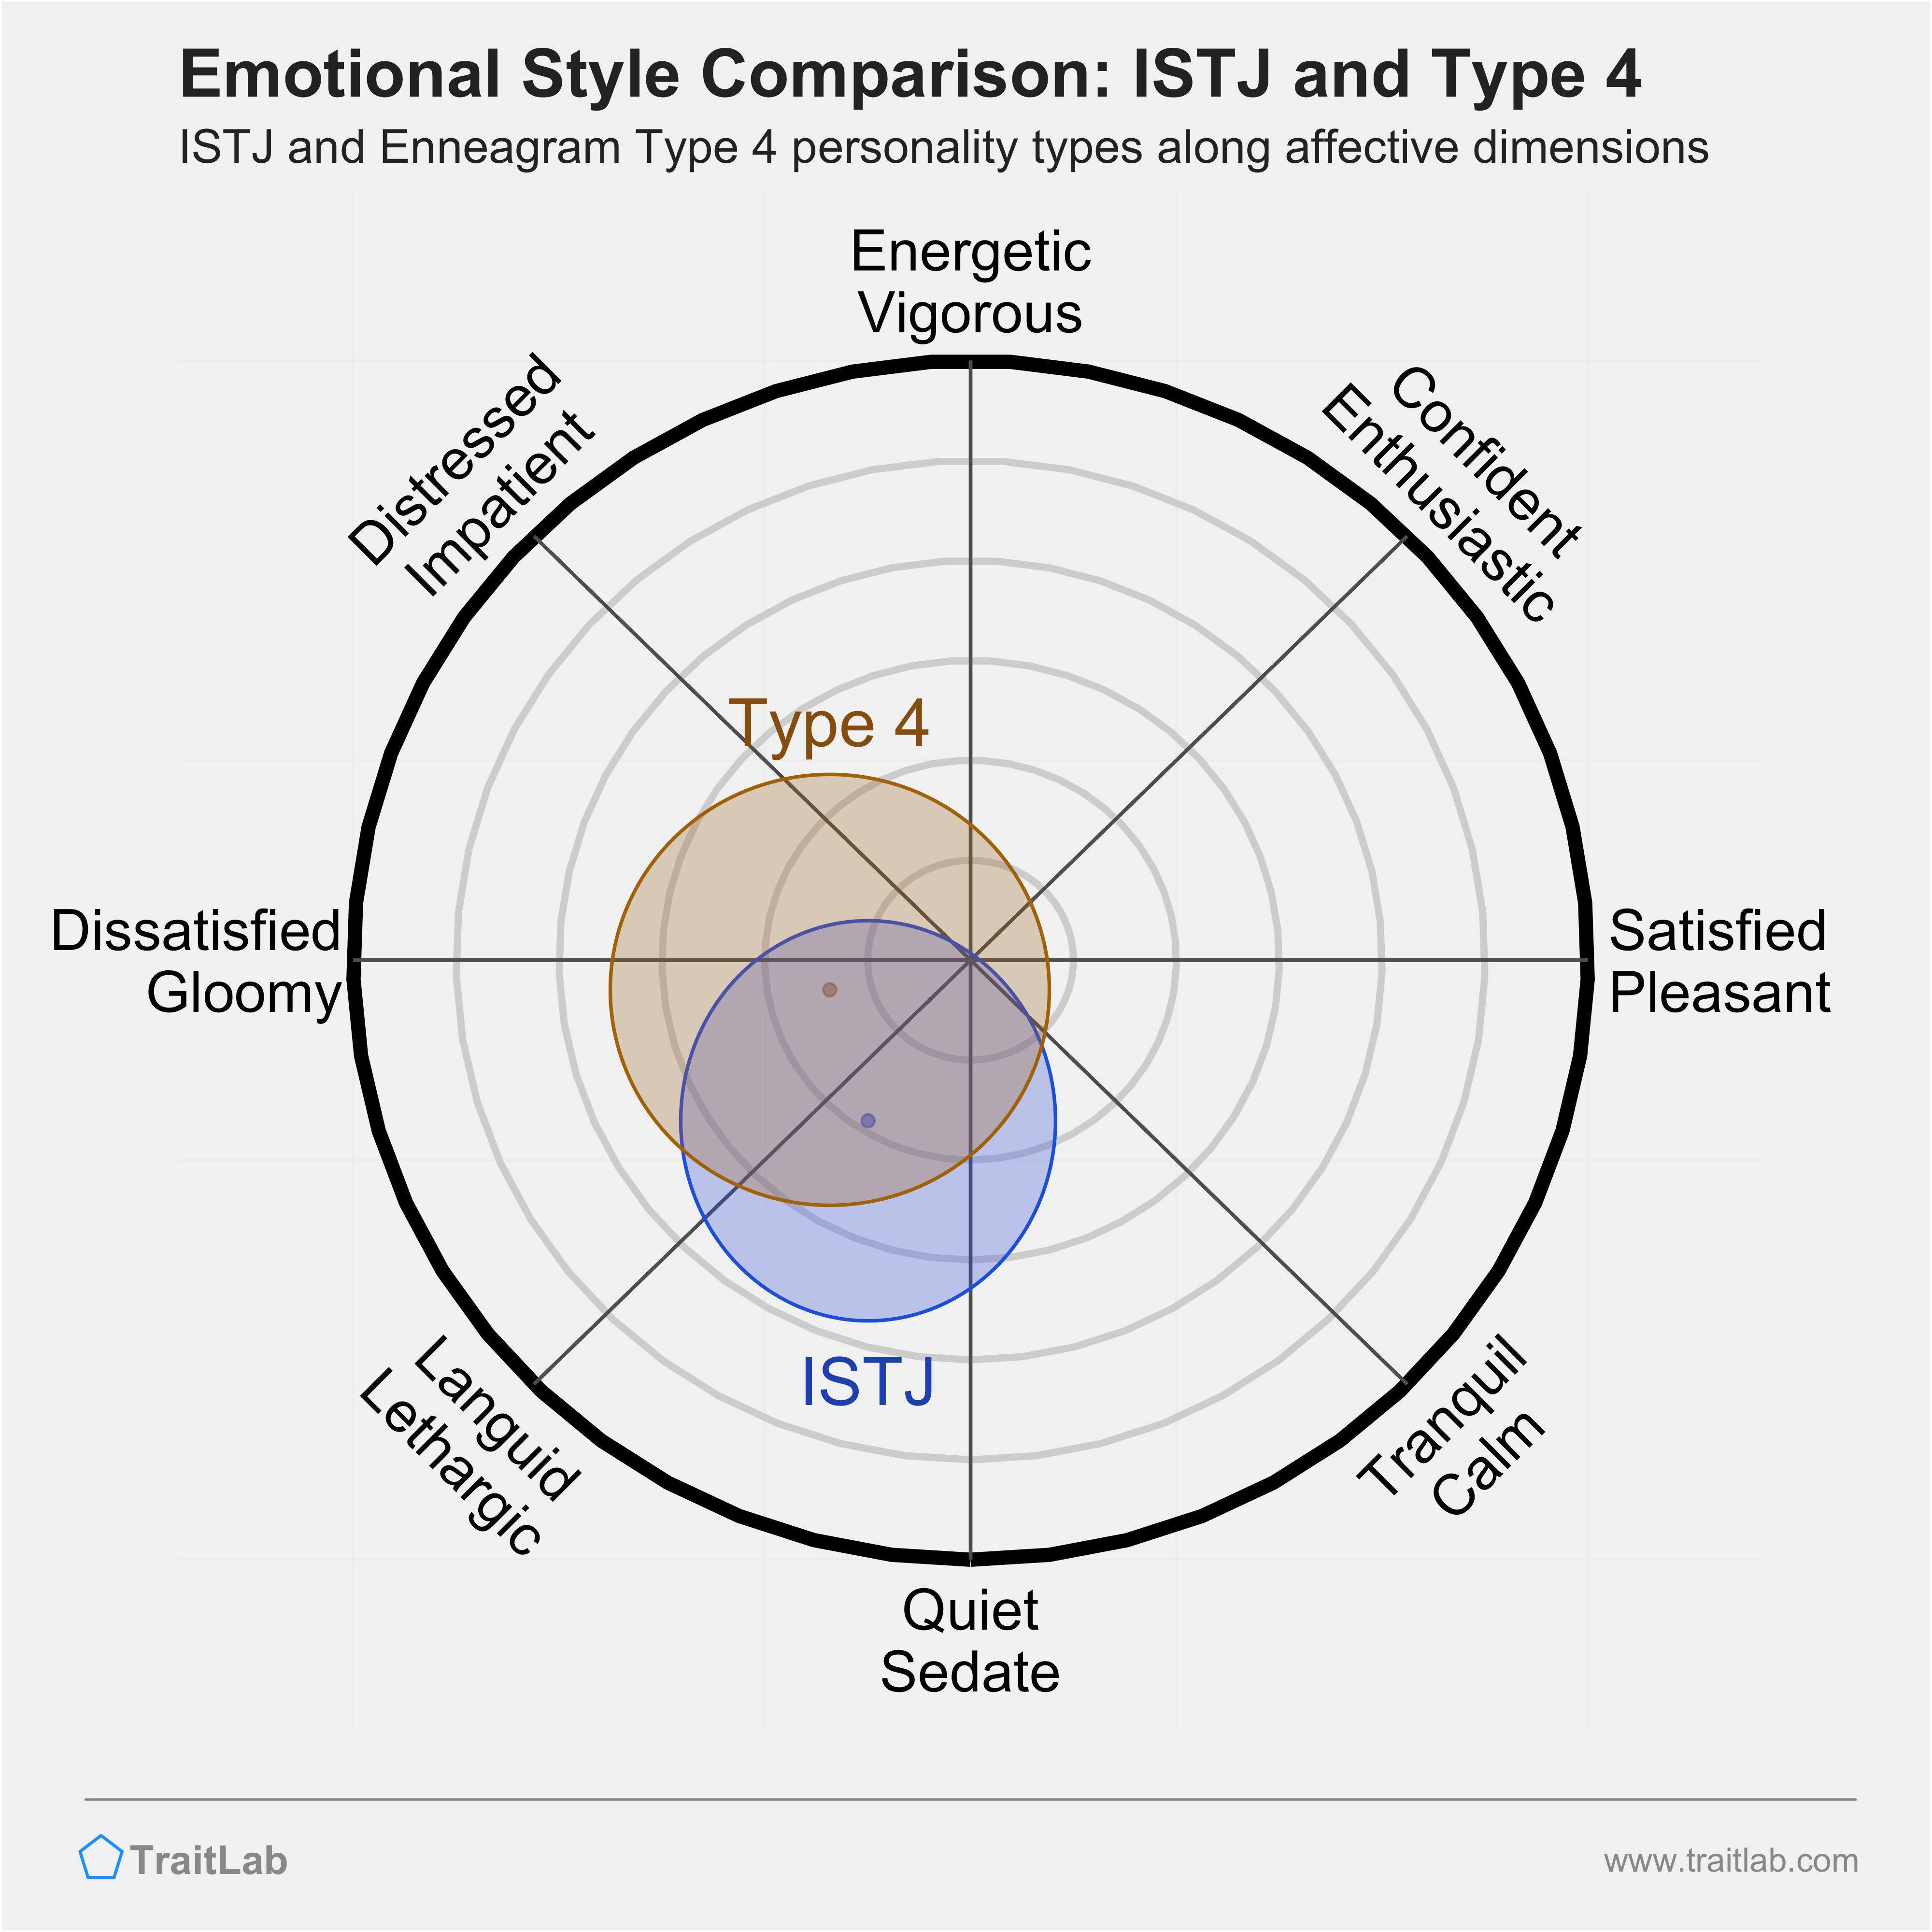 ISTJ and Type 4 comparison across emotional (affective) dimensions